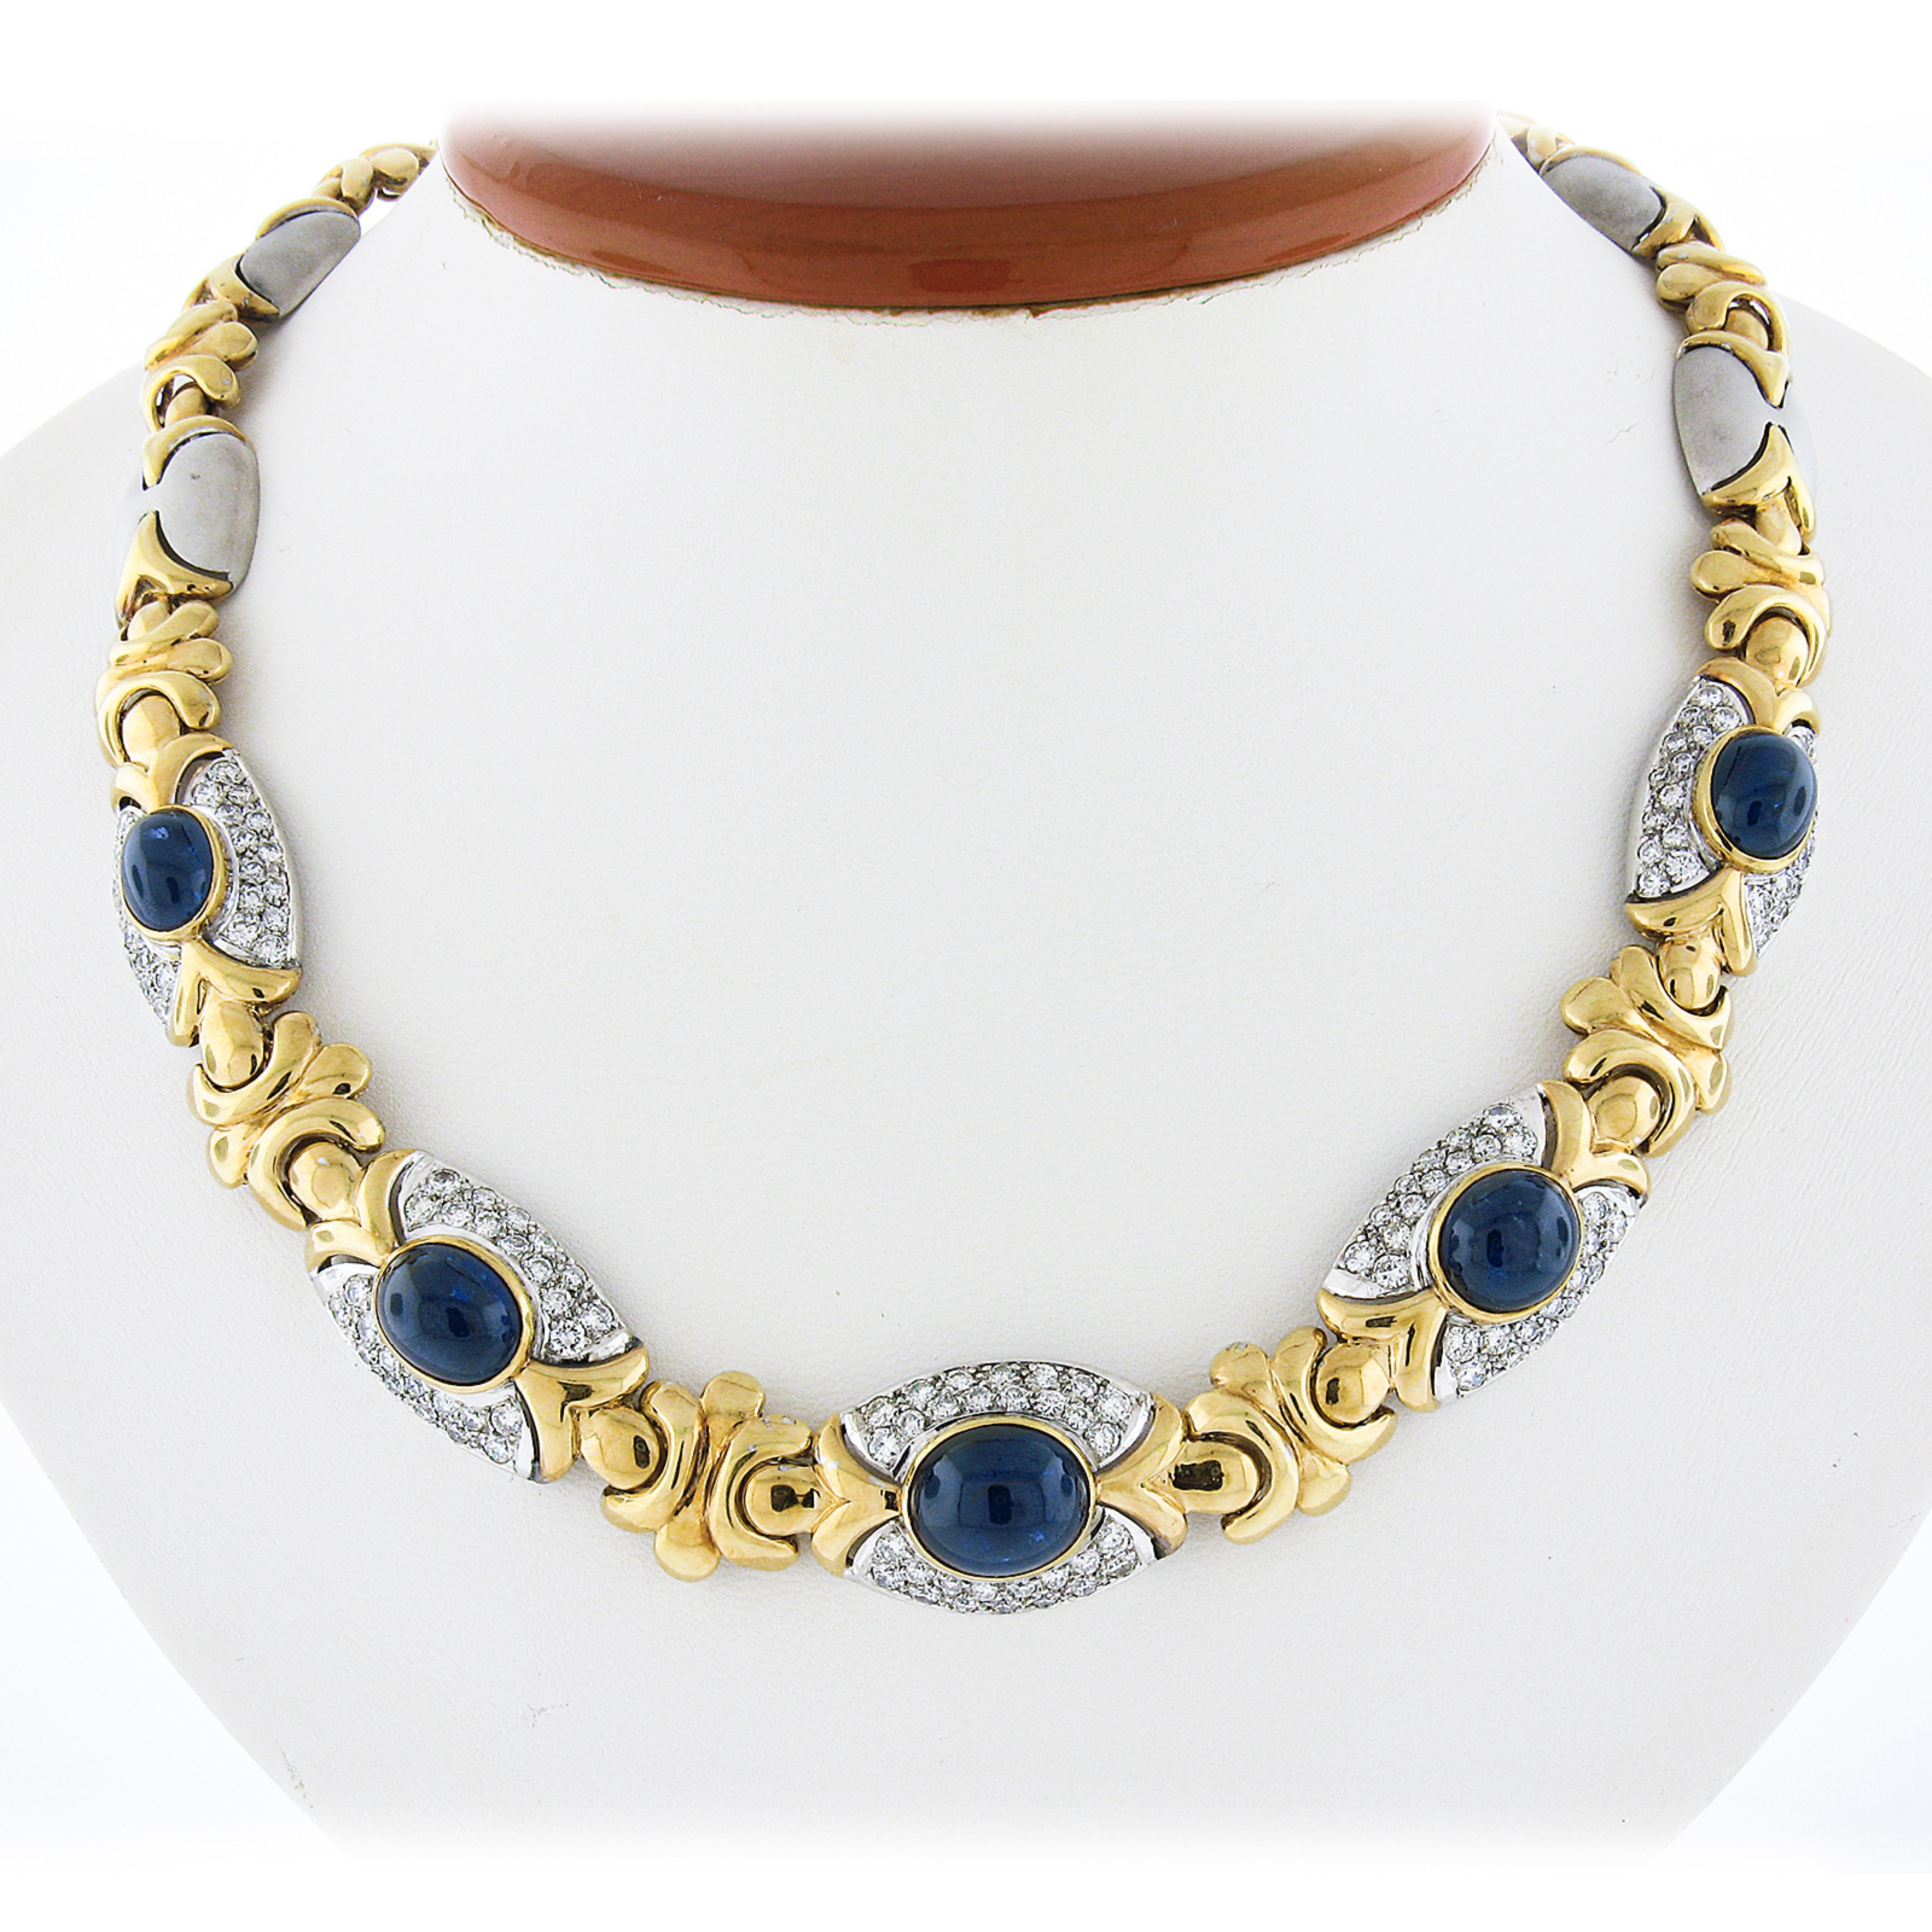 Here we have a breathtaking and very well made necklace that is crafted from solid 18k yellow and white gold. The necklace features fine oval cabochon cut sapphires, of which two have been randomly selected for testing by GIA, and are neatly bezel